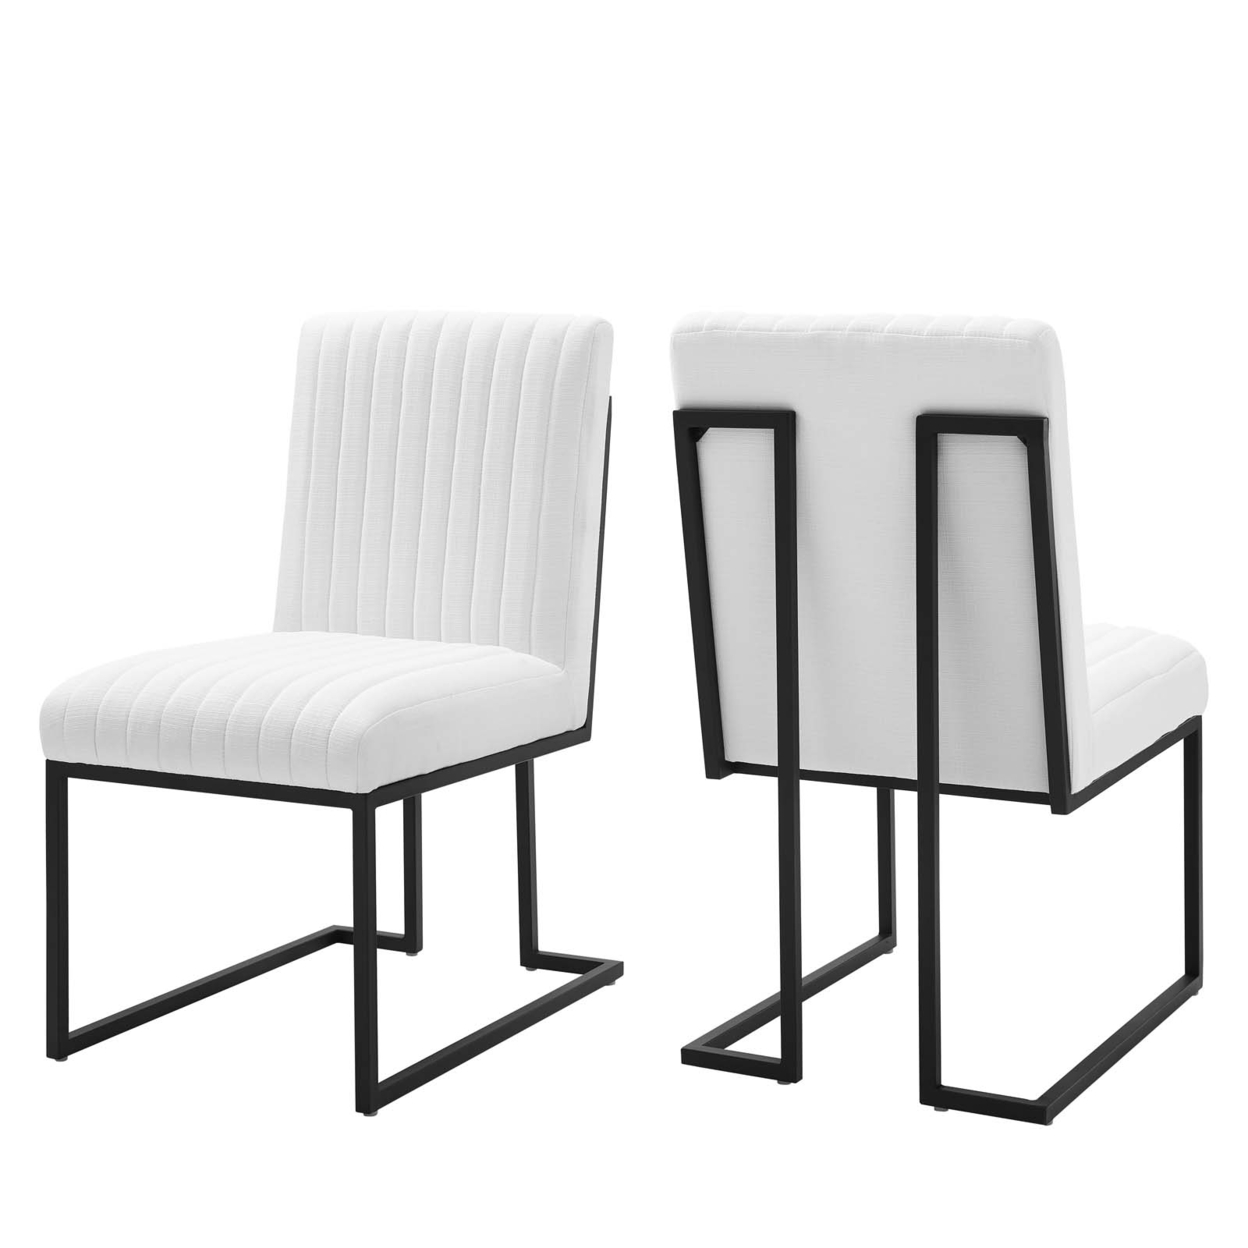 Indulge Channel Tufted Fabric Dining Chairs - Set Of 2, White